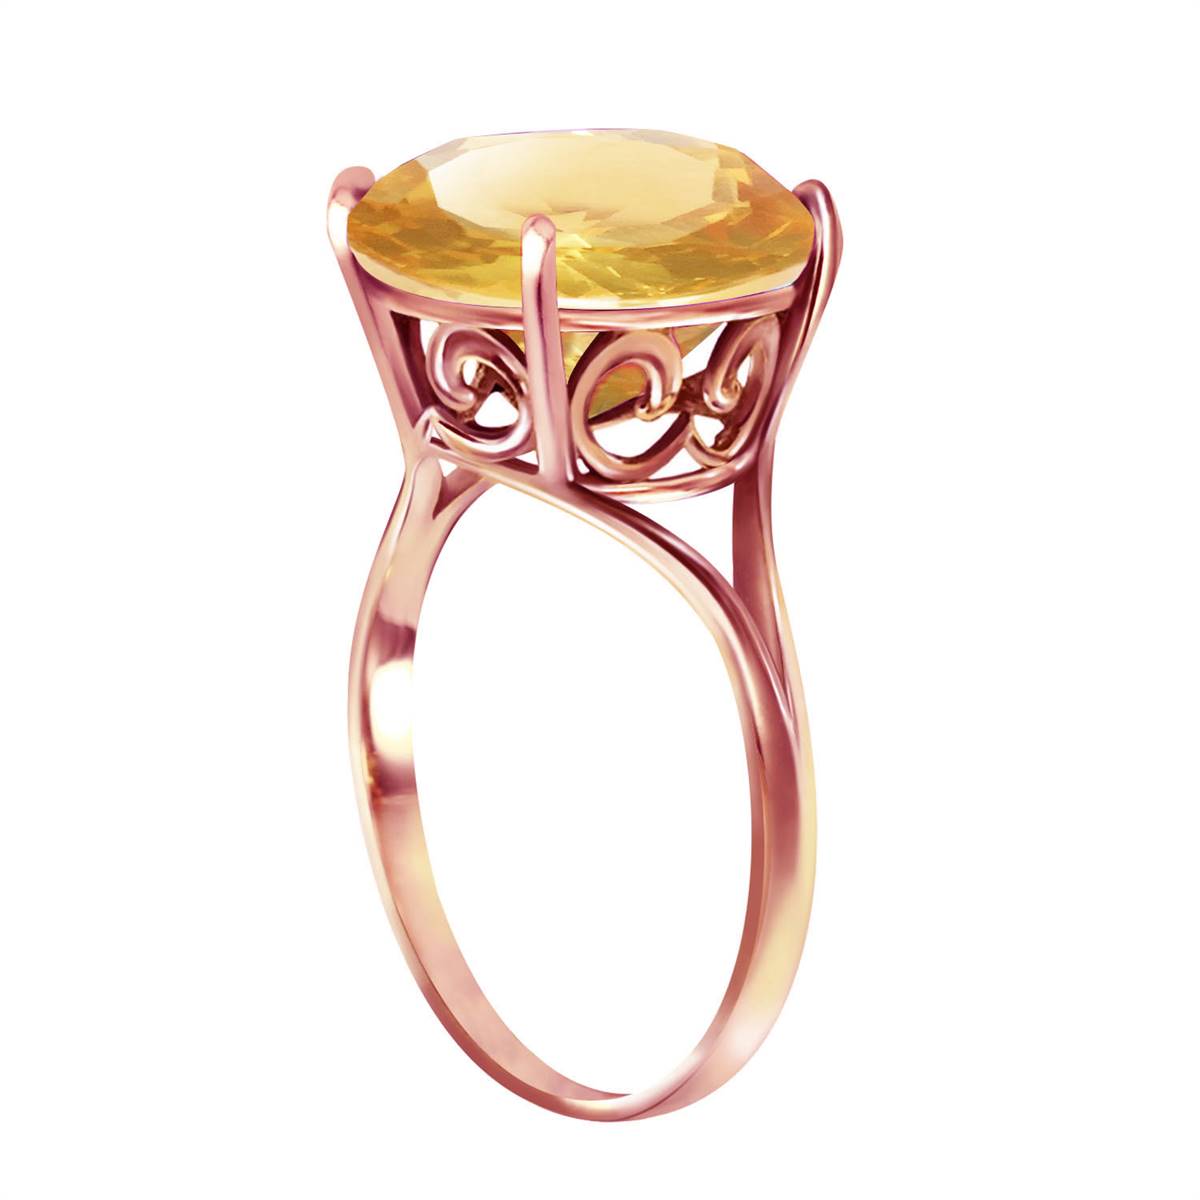 14K Solid Rose Gold Ring Natural 12 mm Round Citrine Certified